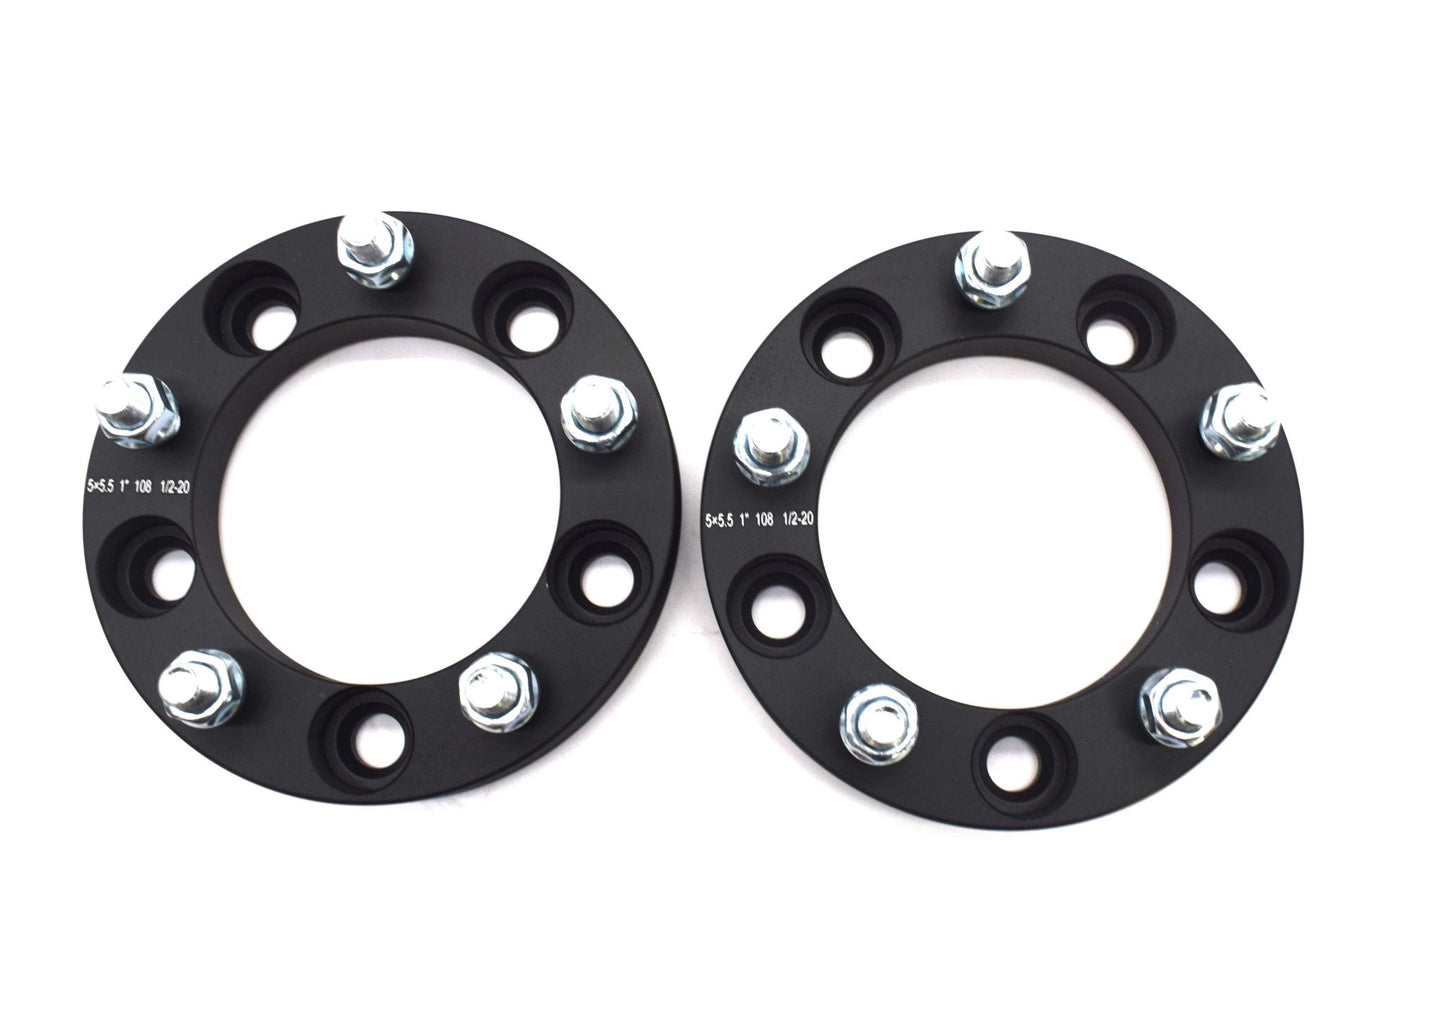 Wheel Spacers, 1/2", with 2WD Disc Brake Kit - The JeepsterMan